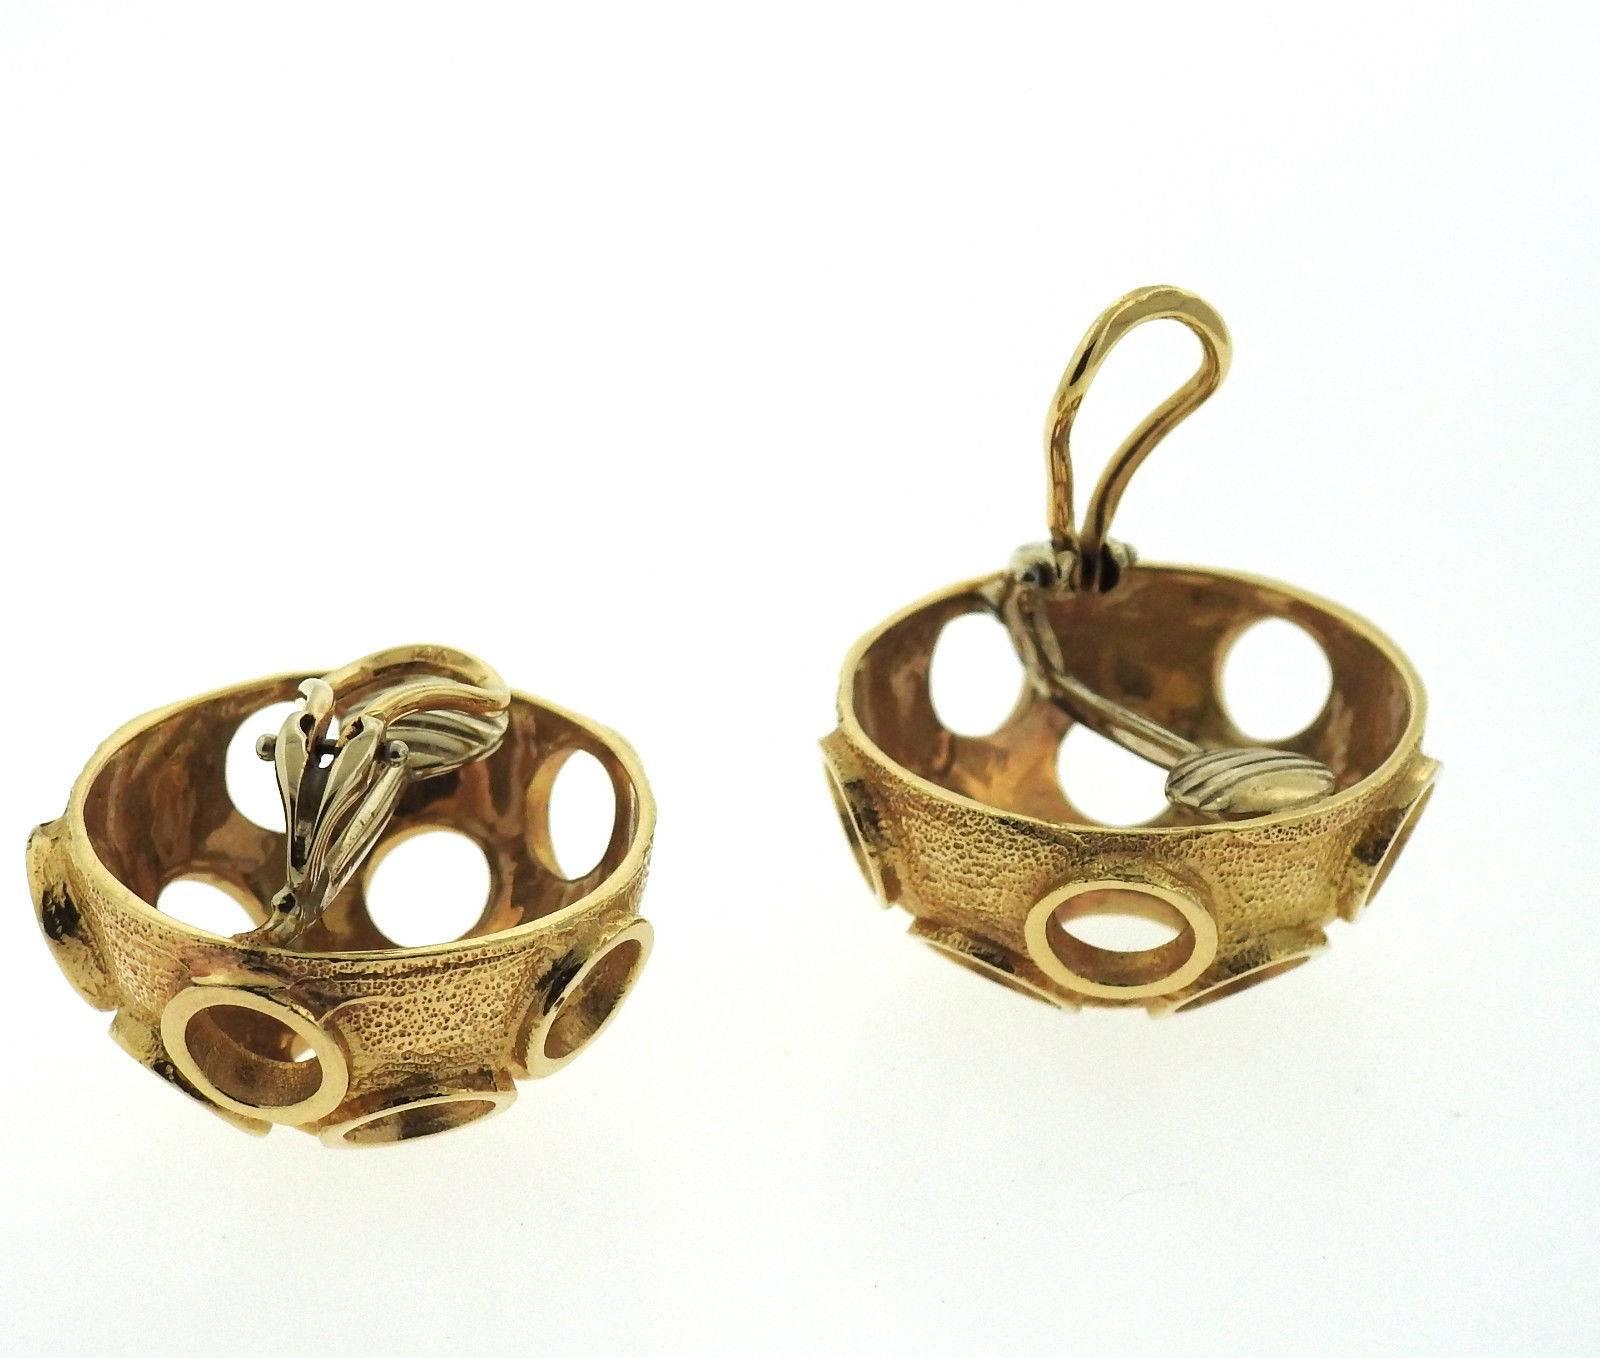 A pair of 14k yellow gold earrings resembling craters.  The earrings measure measure 26mm in diameter and sit approx. 14mm from the ear.  The earrings weigh 22.9 grams.